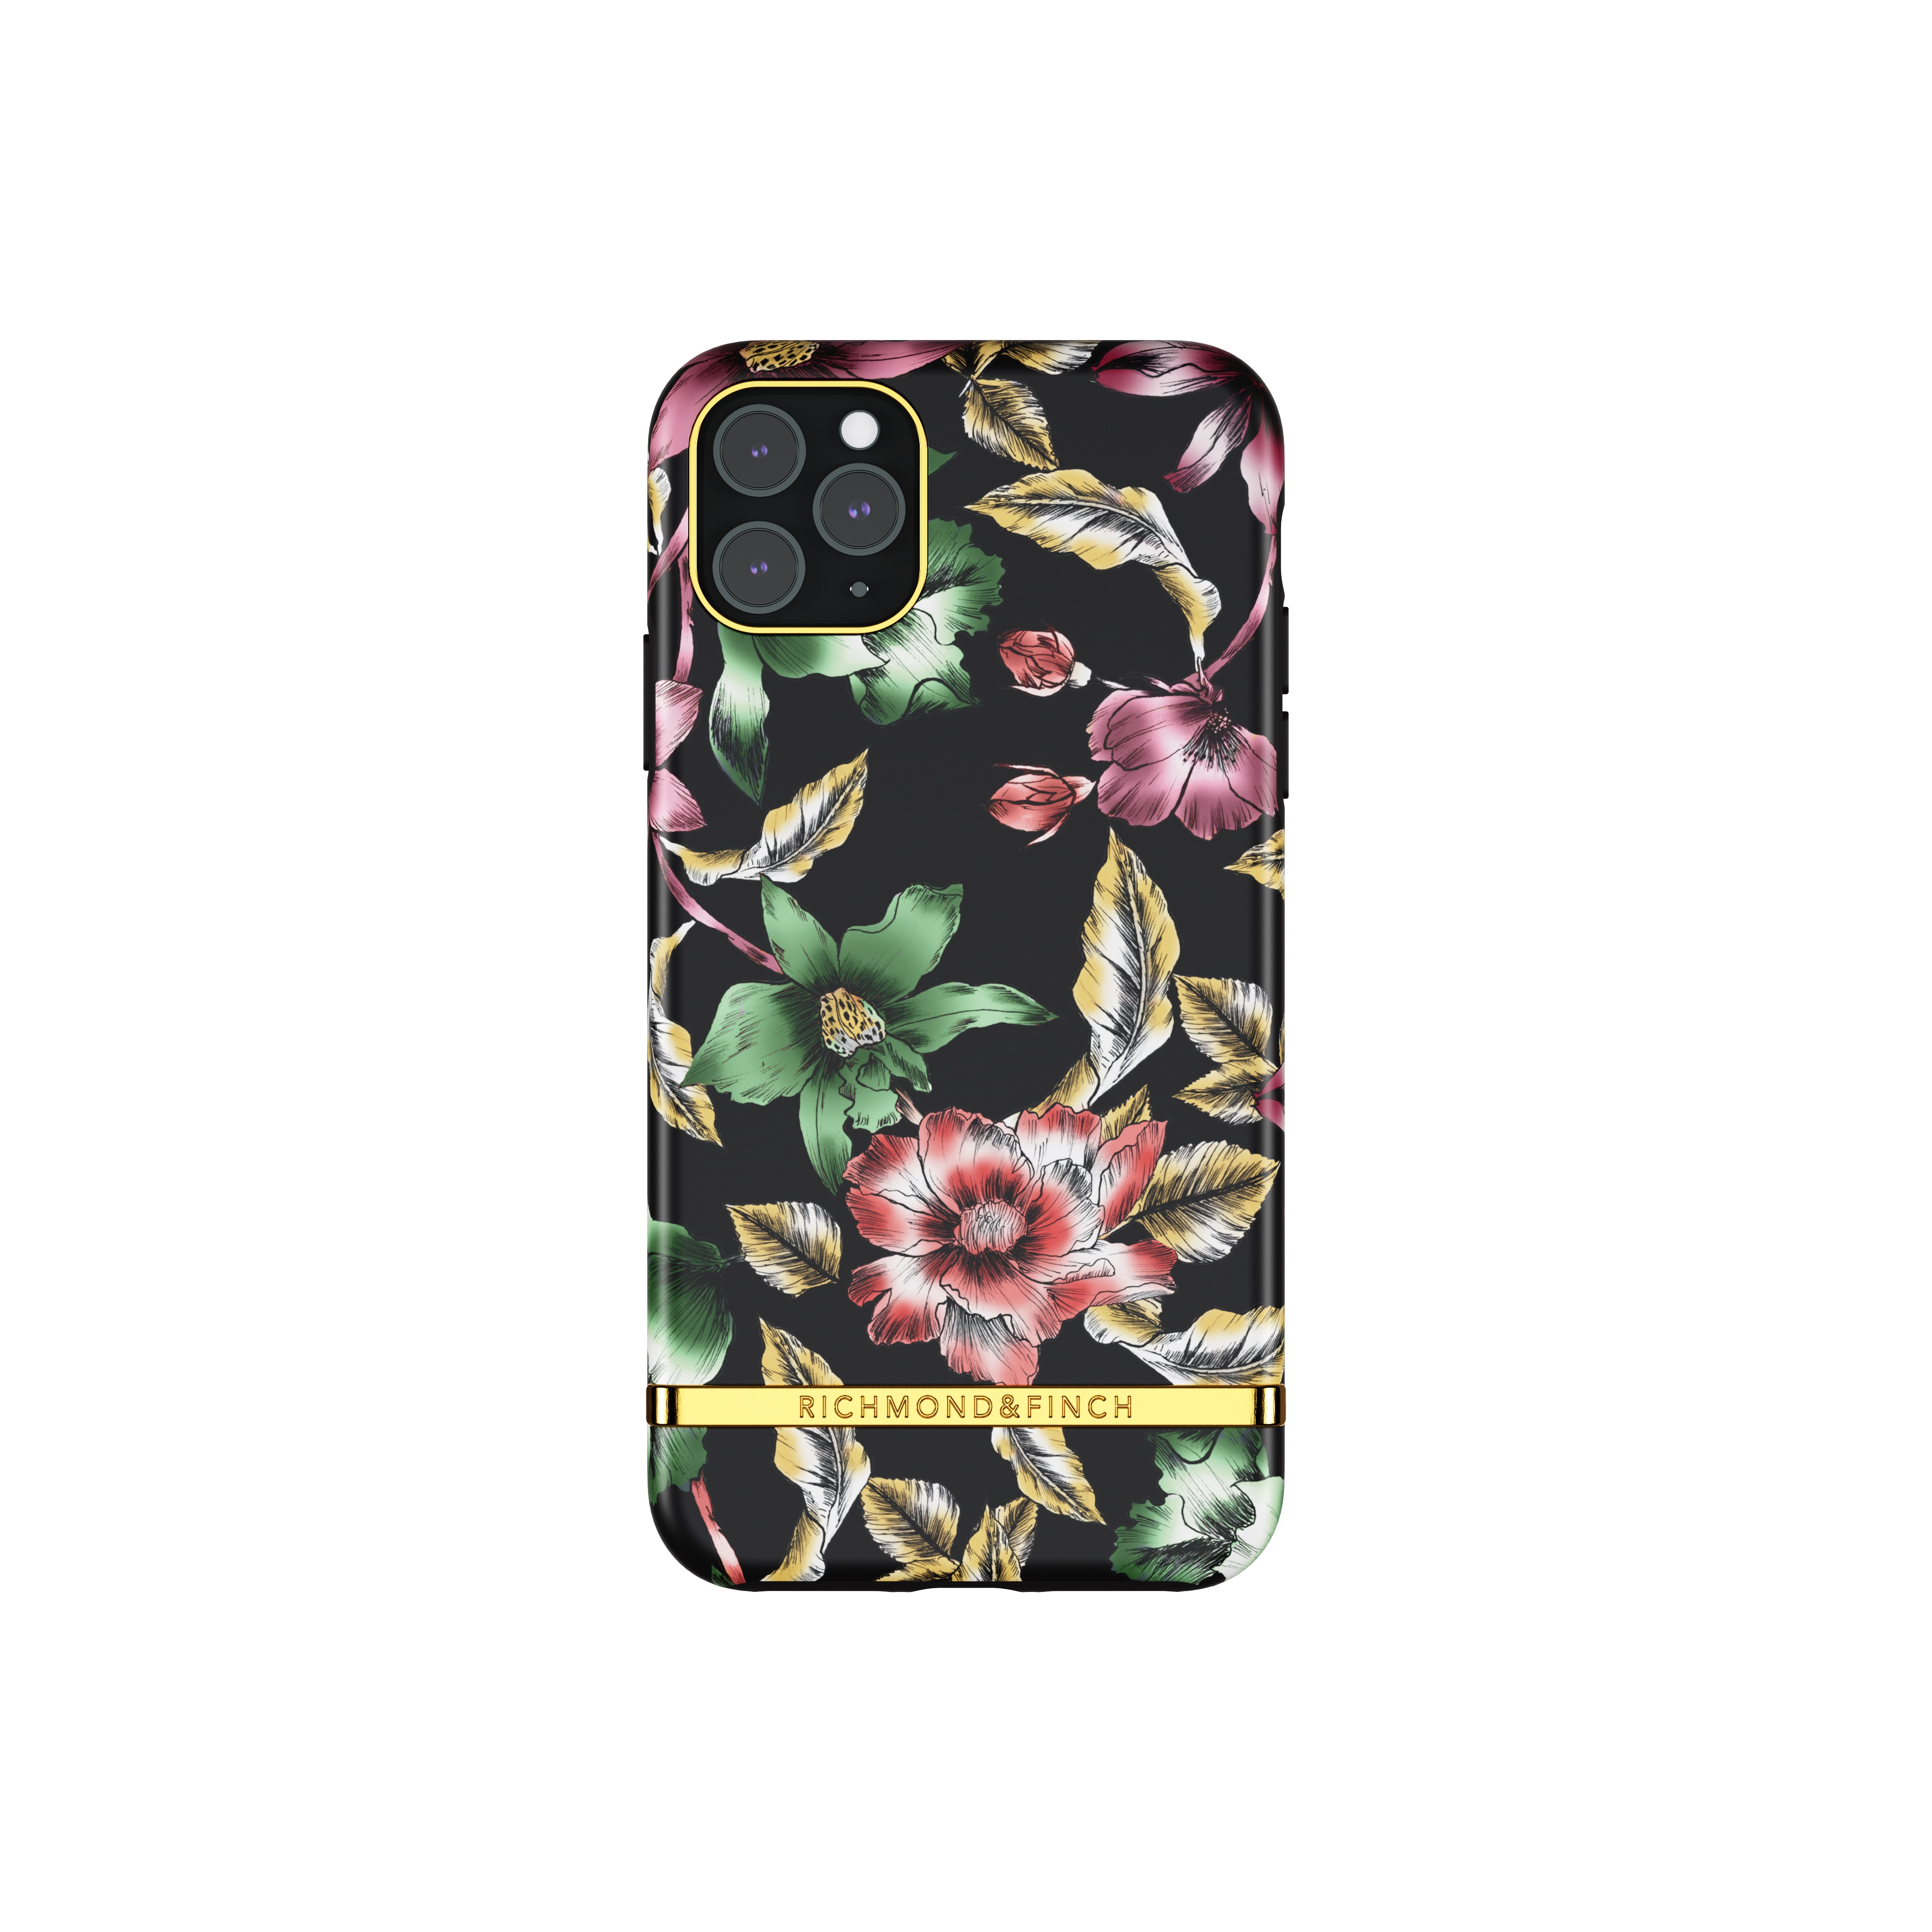 RICHMOND & Pro APPLE, PRO iPhone COLOURFUL 11 IPHONE FINCH MAX, 11 Backcover, Flower Max, Show